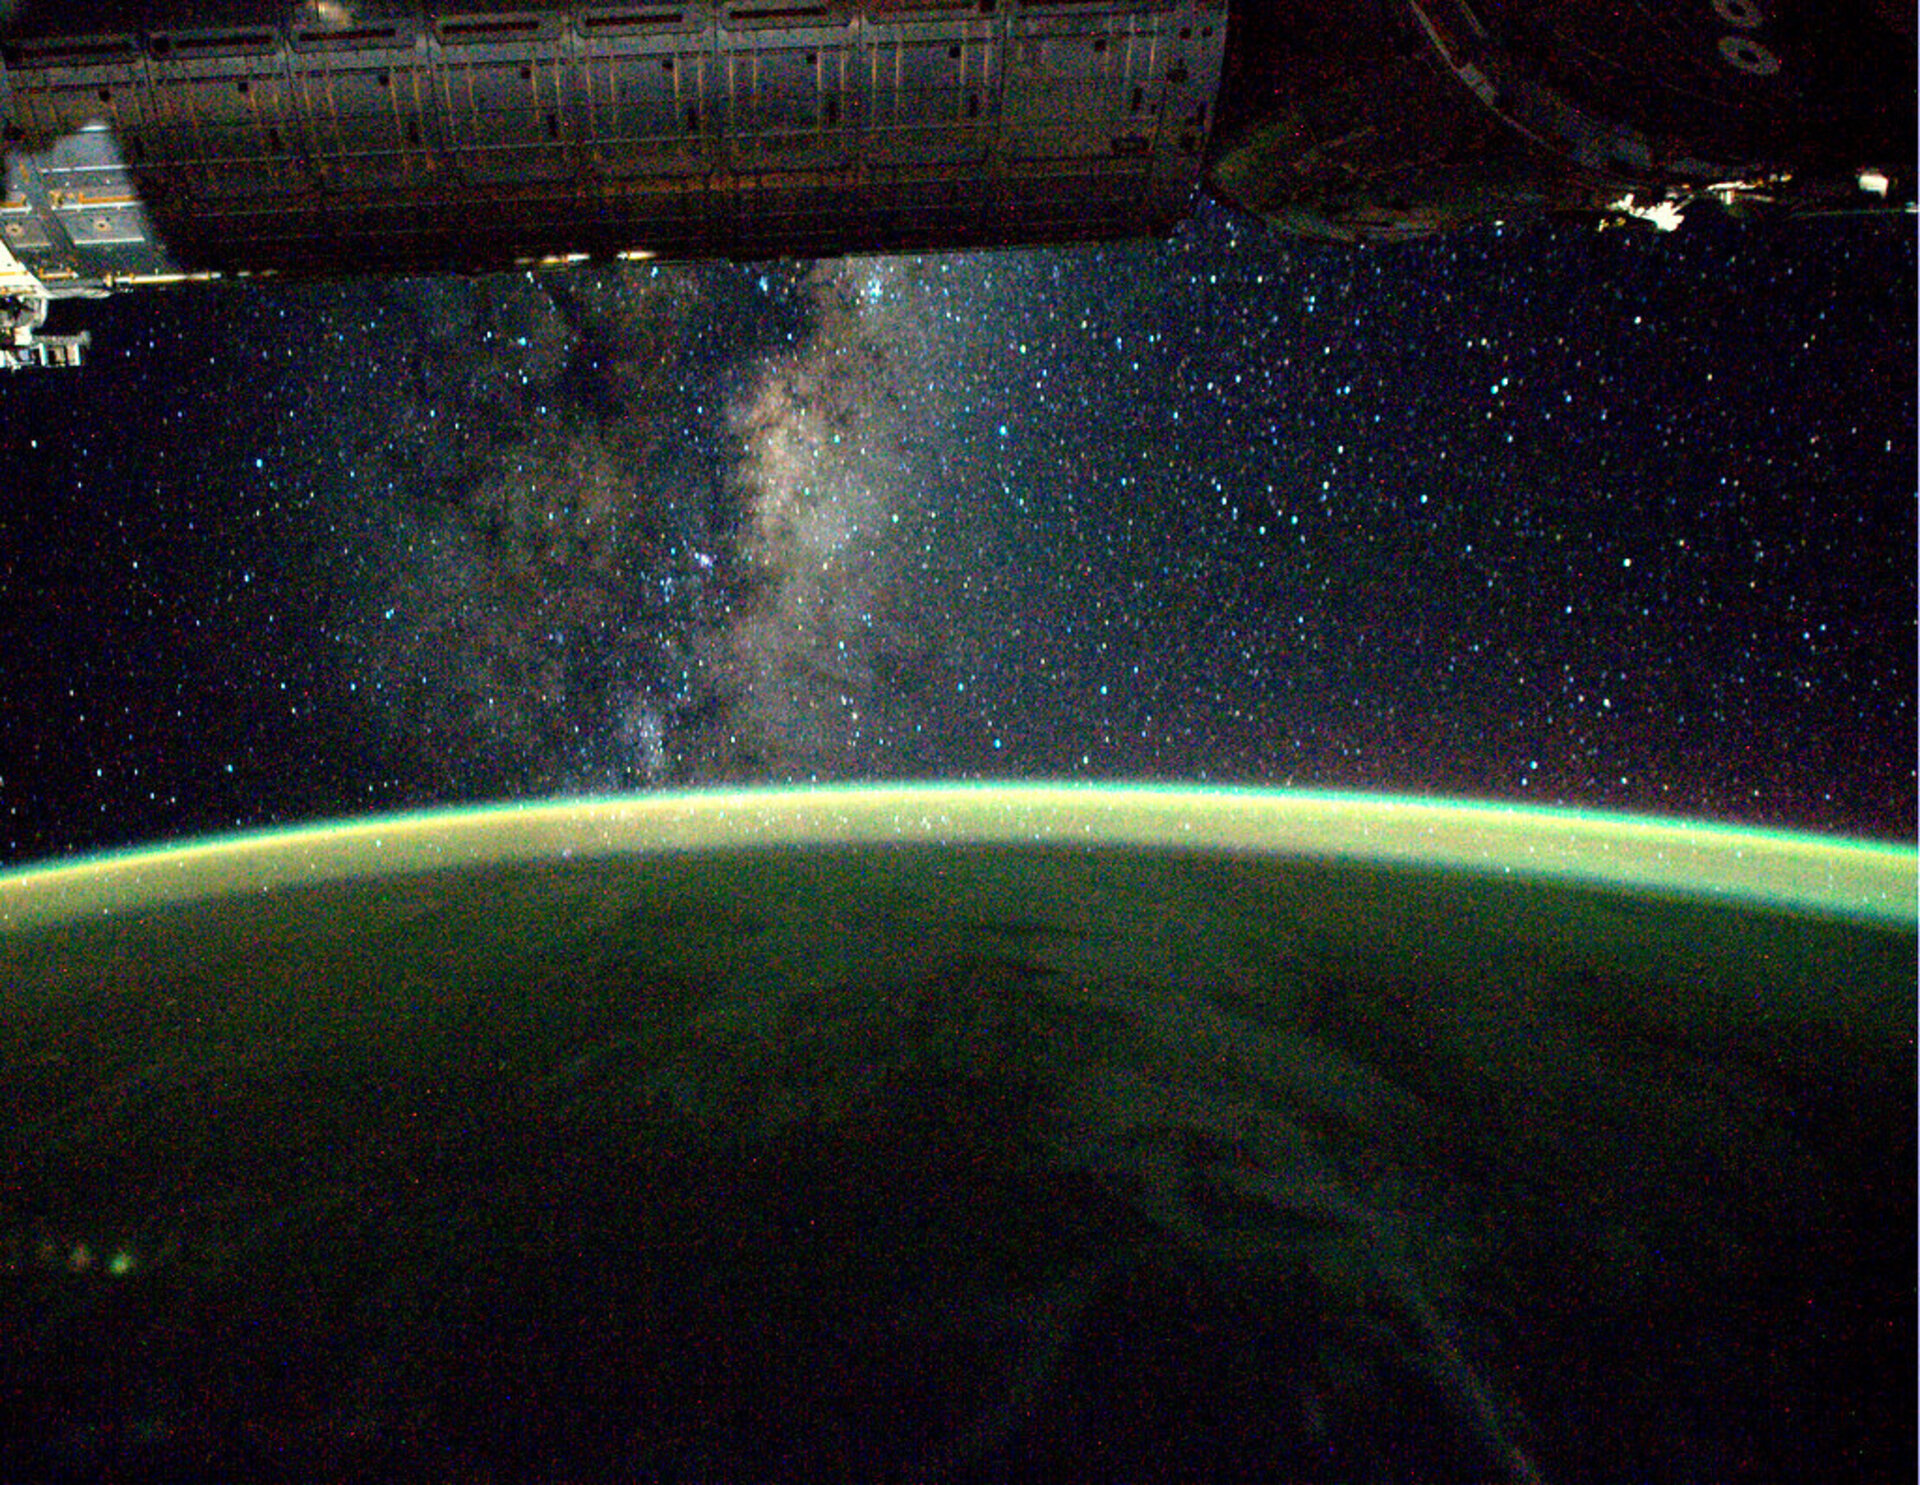 The Milky Way, as seen onboard the ISS